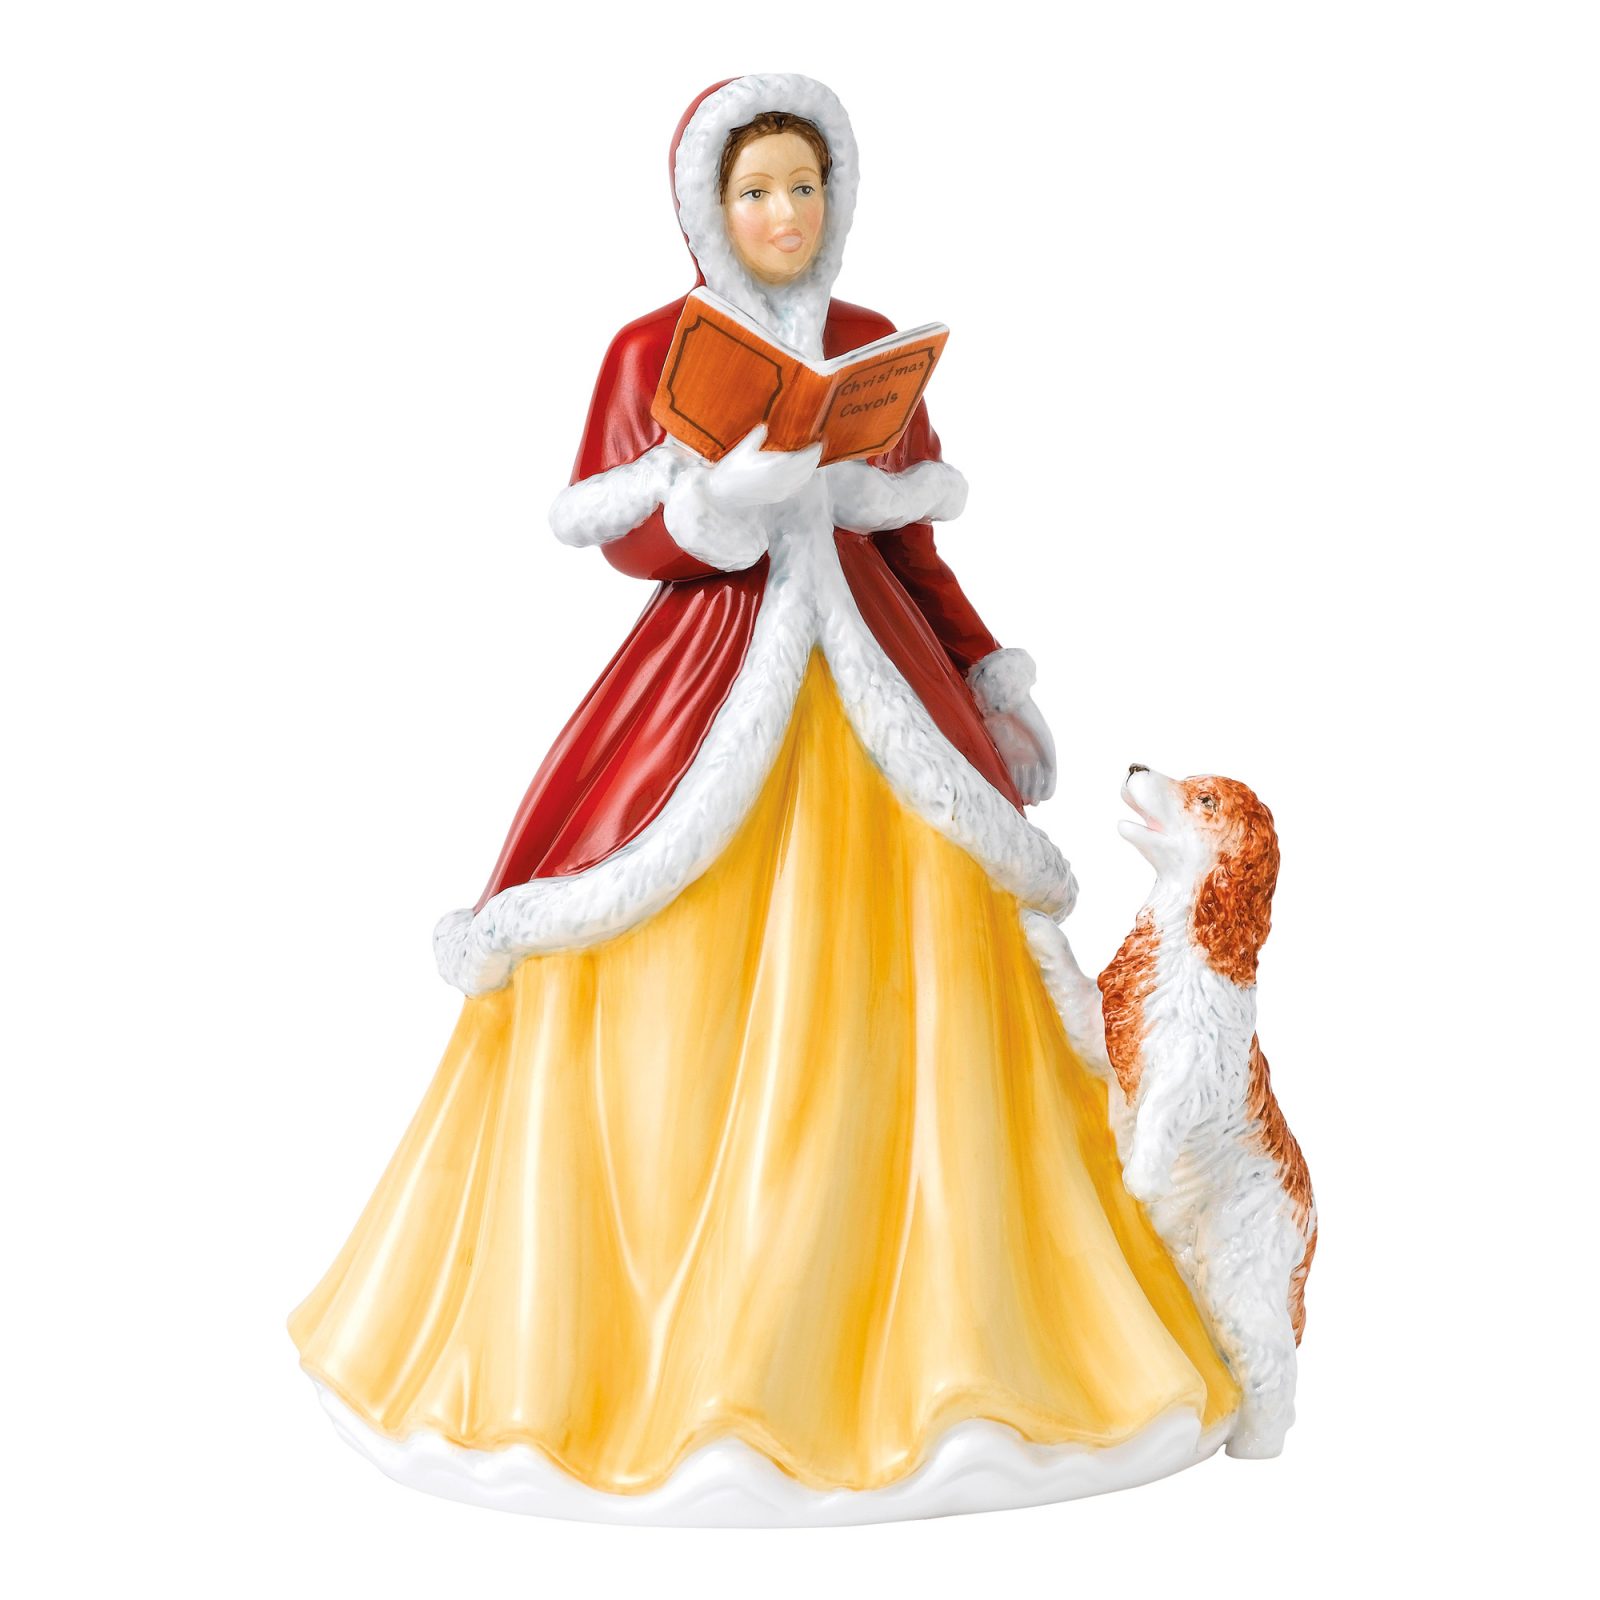 Angels Realms of Glory HN5889 - Royal Doulton Figurine